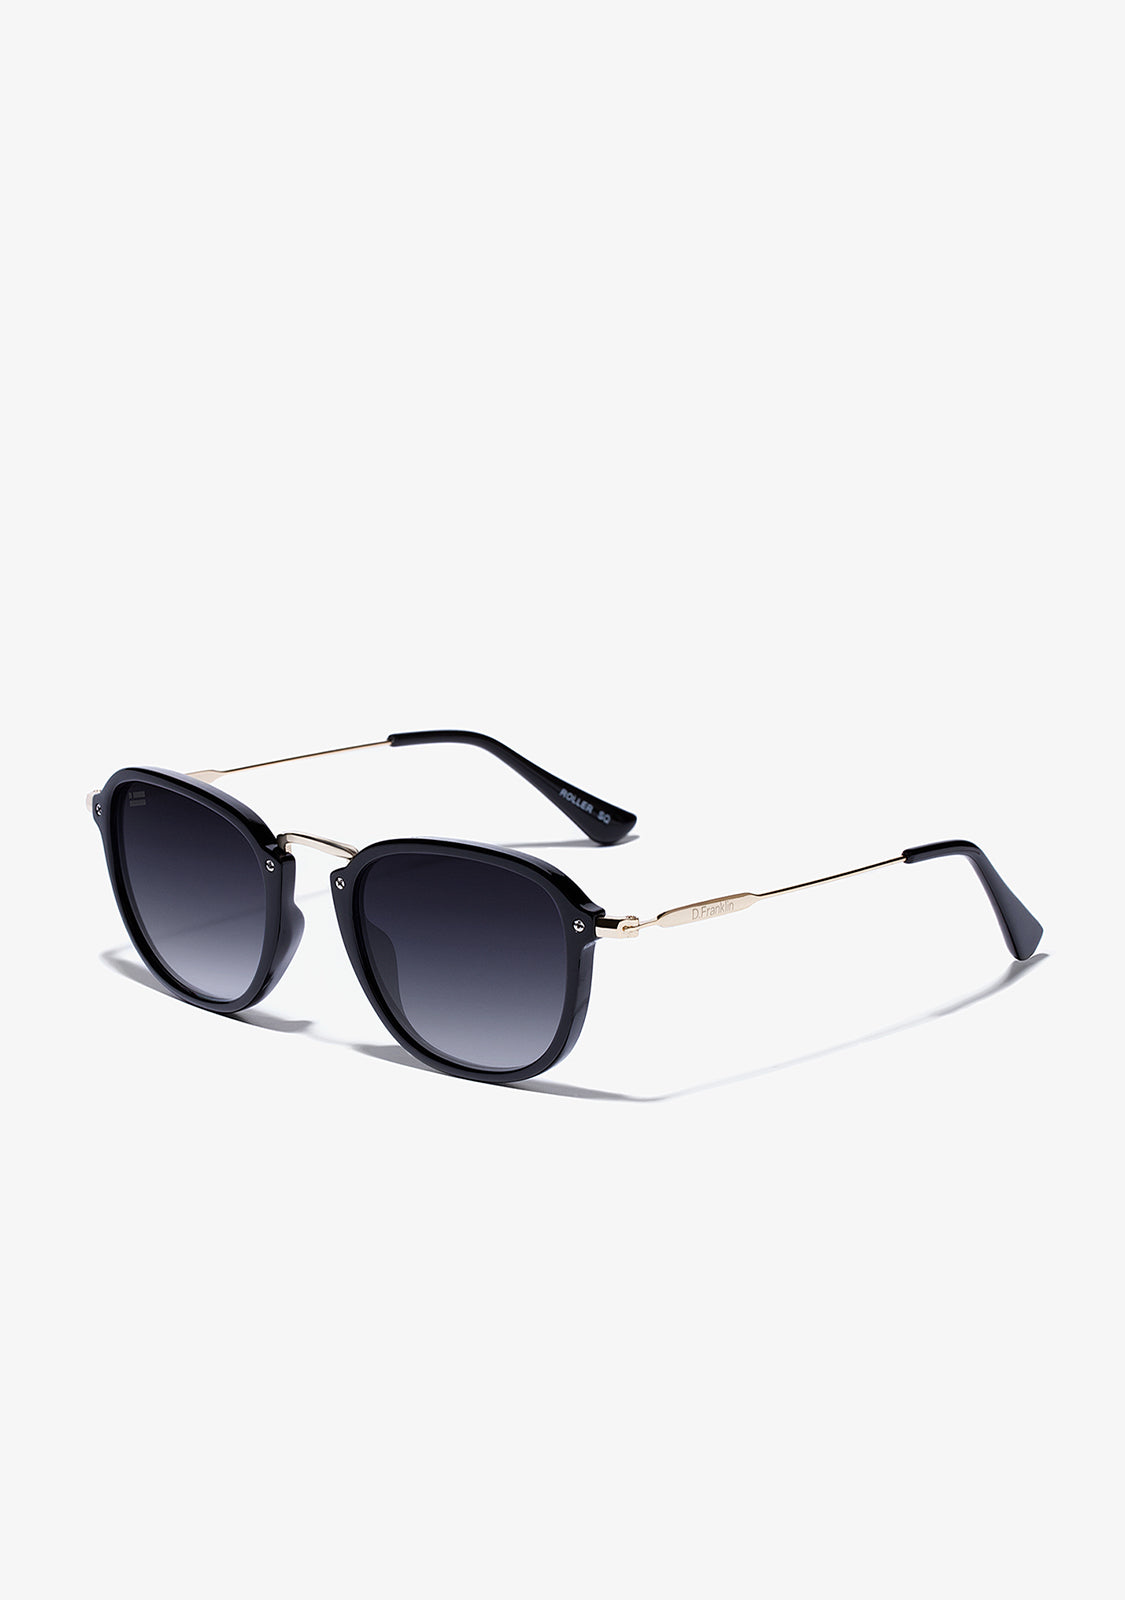 I was wondering if some one knew if the D.Franklin sunglasses are real or  not, Ive just seen a lot of mixed reviews about how it takes to long to  deliver in